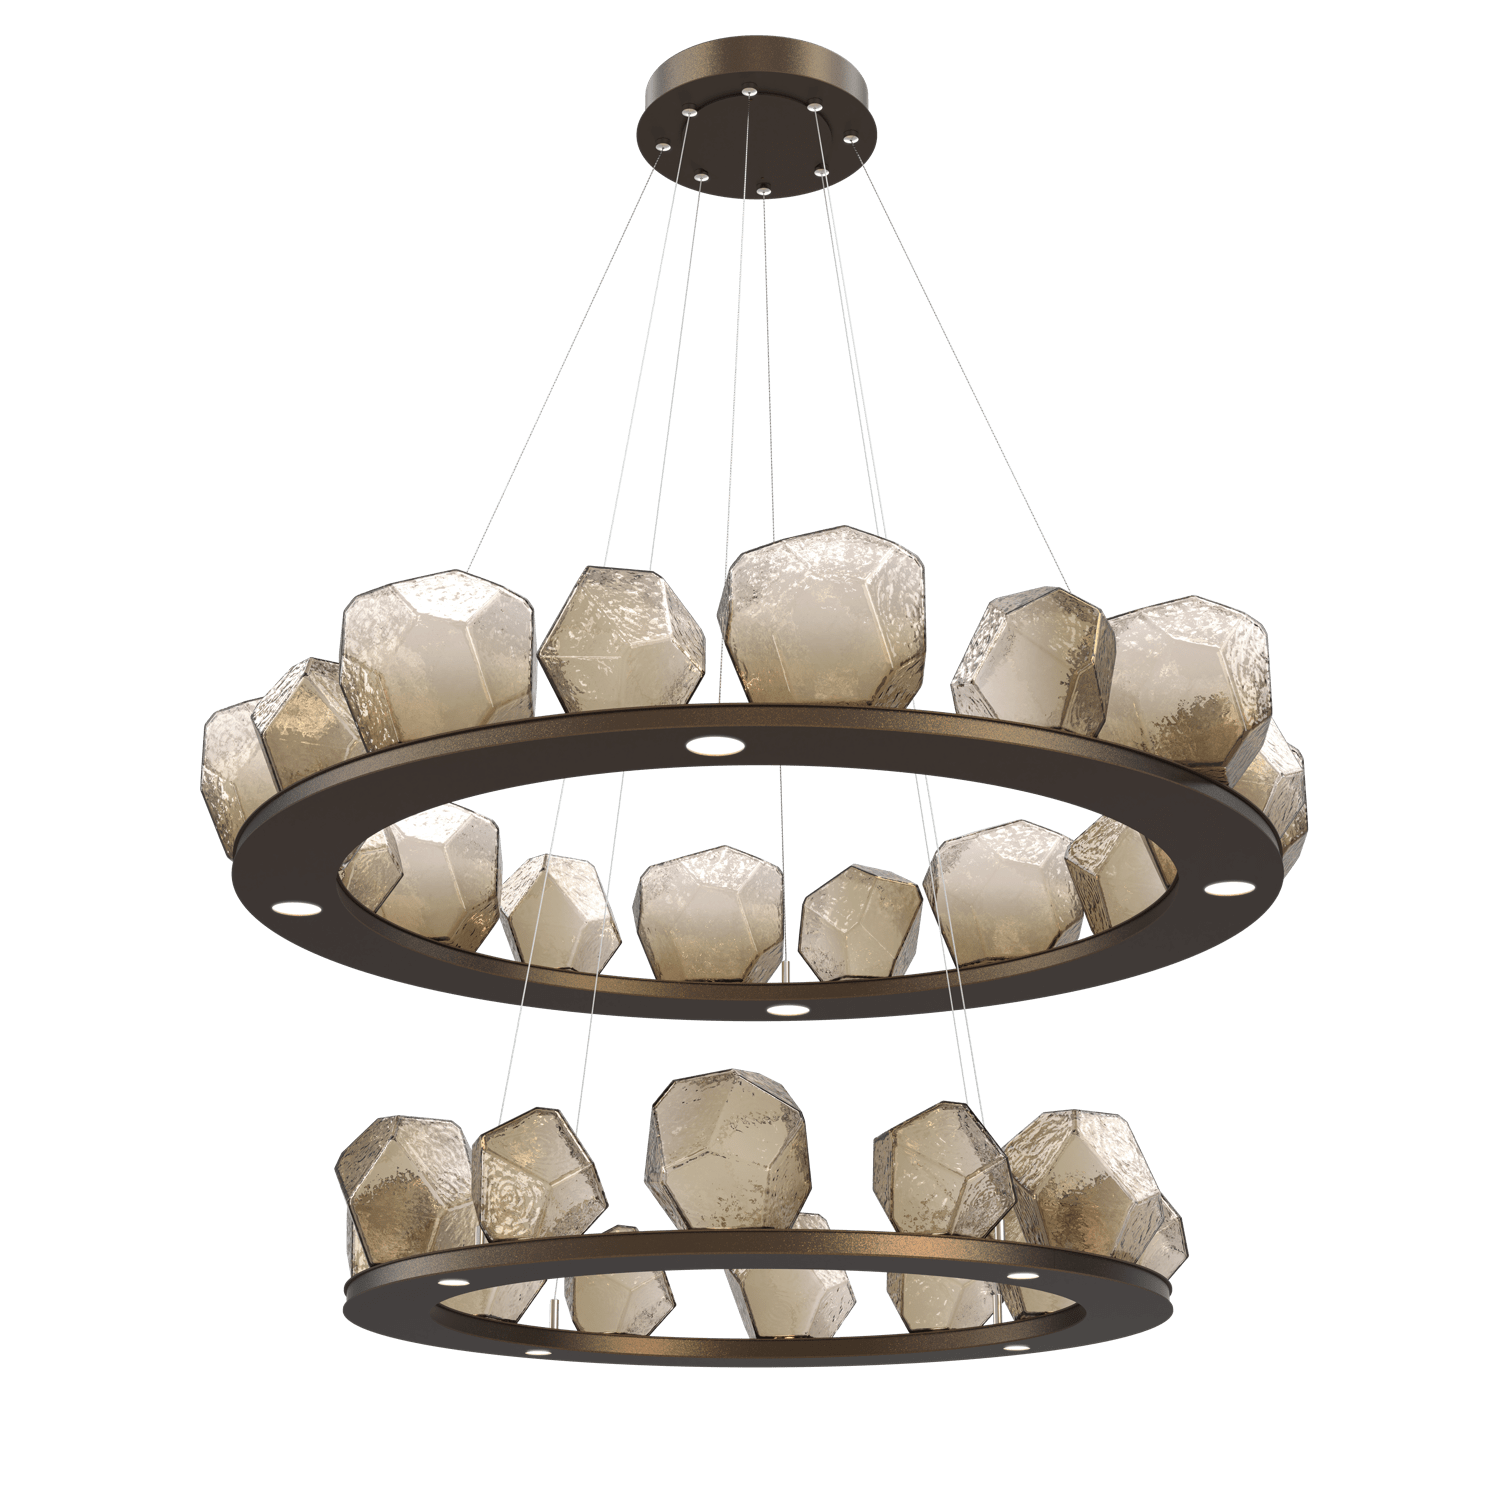 CHB0039-2B-FB-B-Hammerton-Studio-Gem-48-inch-two-tier-ring-chandelier-with-flat-bronze-finish-and-bronze-blown-glass-shades-and-LED-lamping